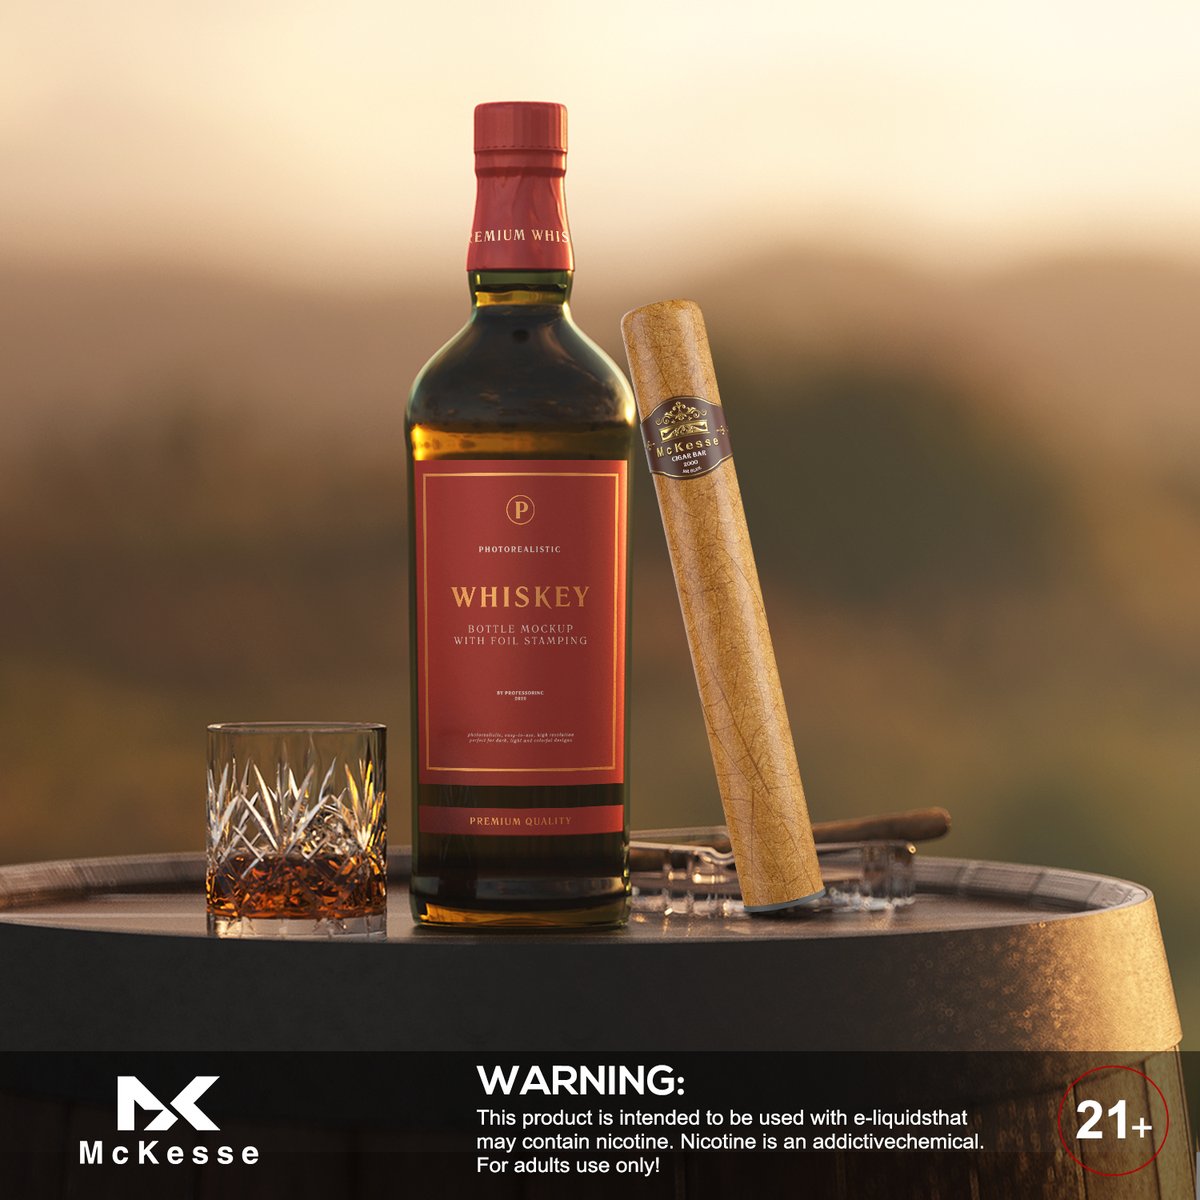 Using advanced mesh coil technology, each bite is filled with rich smoke and a mellow taste. The unique design of the #cigarbar also supports up to 2,000 bites of use.

- ONLY 21+🚭
#mckesse #vaping #vapelife #disposablevape #vape #vapers #vapenation #vapeuk #vapor #vapeshop